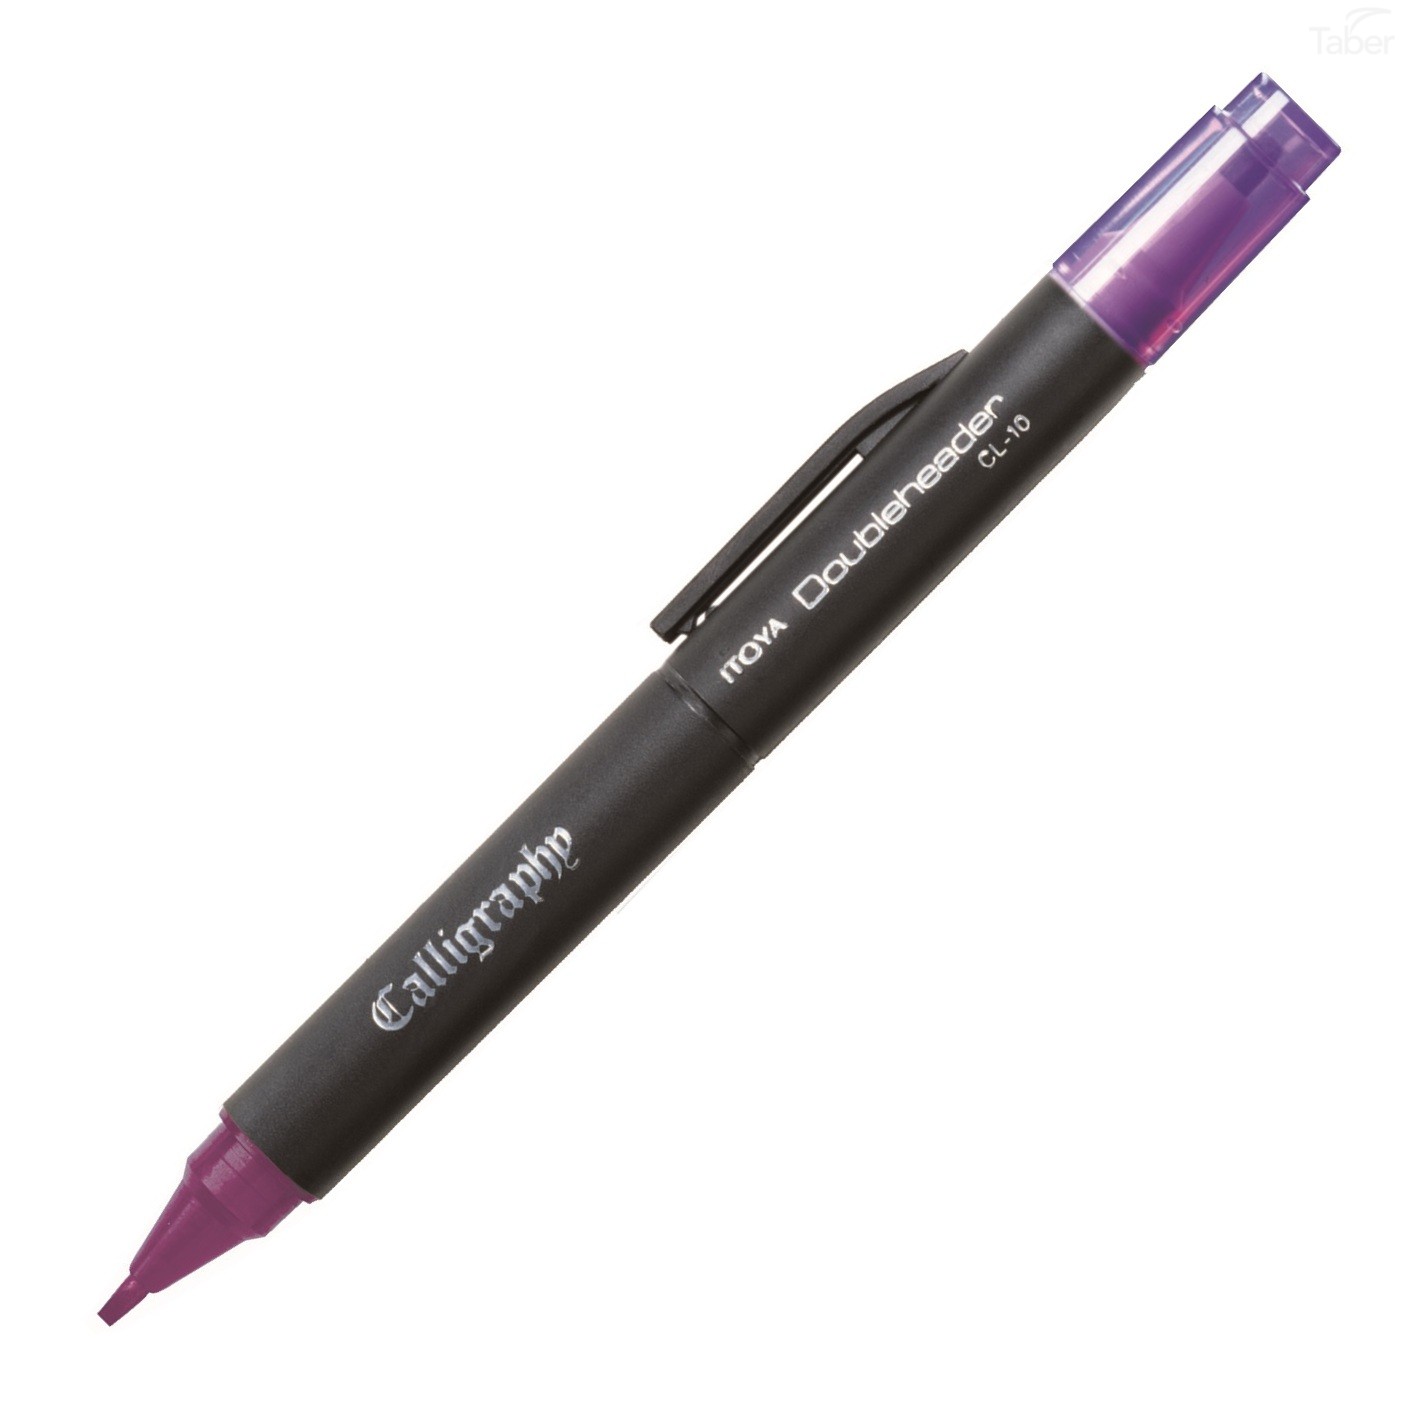 Itoya Doubleheader Calligraphy, Purple 3.0mm and 1.5mm